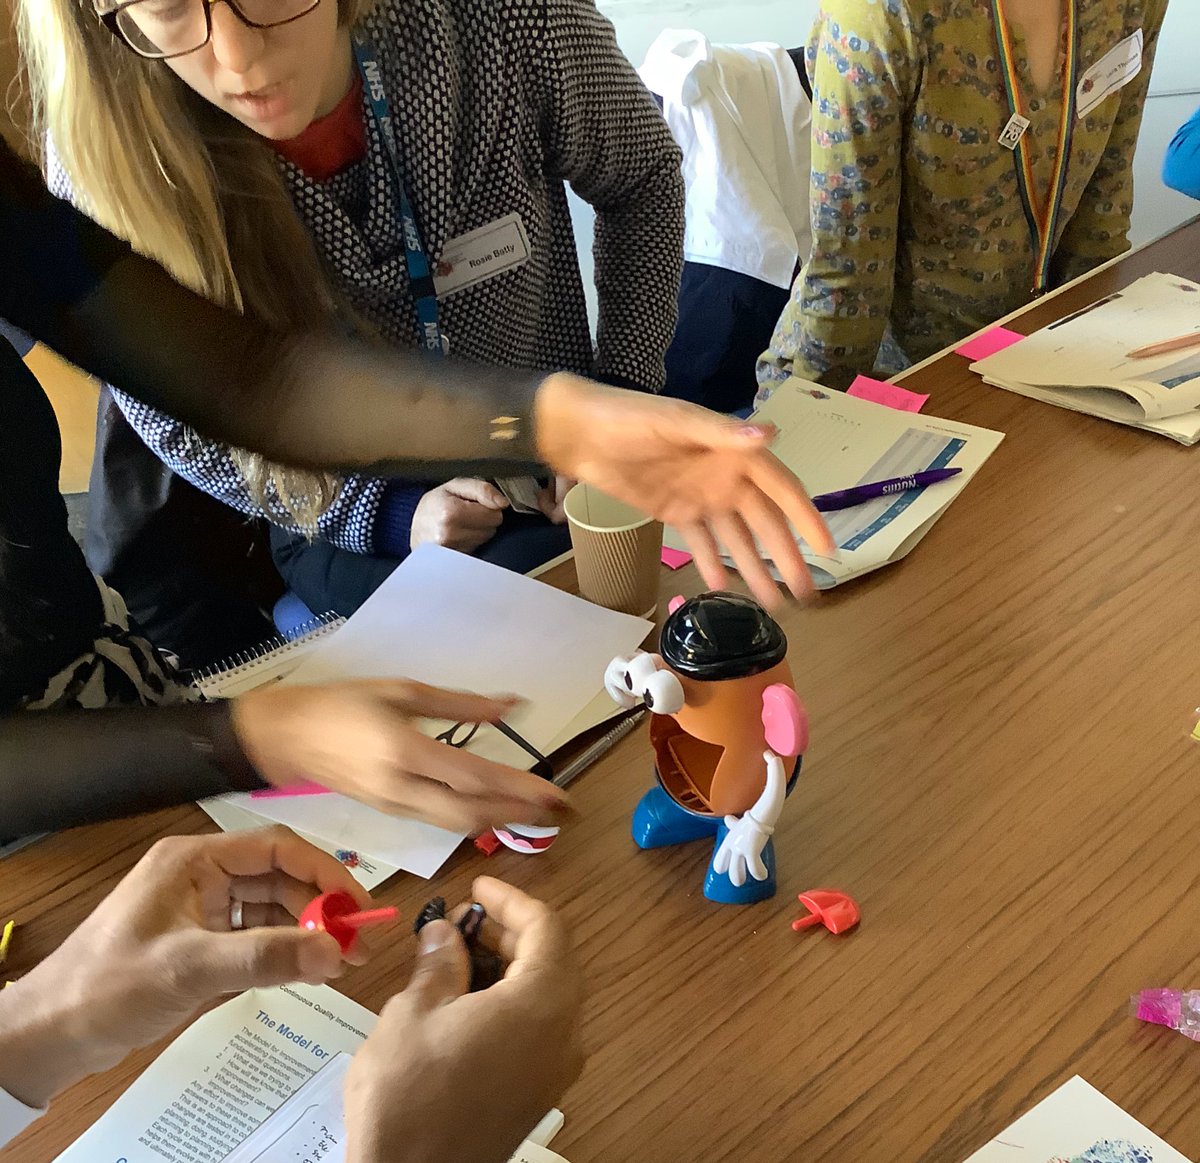 Great to join such enthusiastic colleagues from across our health and care system at Croydon Quality Improvement training. Mr Potato Head always a winner - think we smashed the record! Go #TeamCroydon. Thanks @CroydonQI for organising!